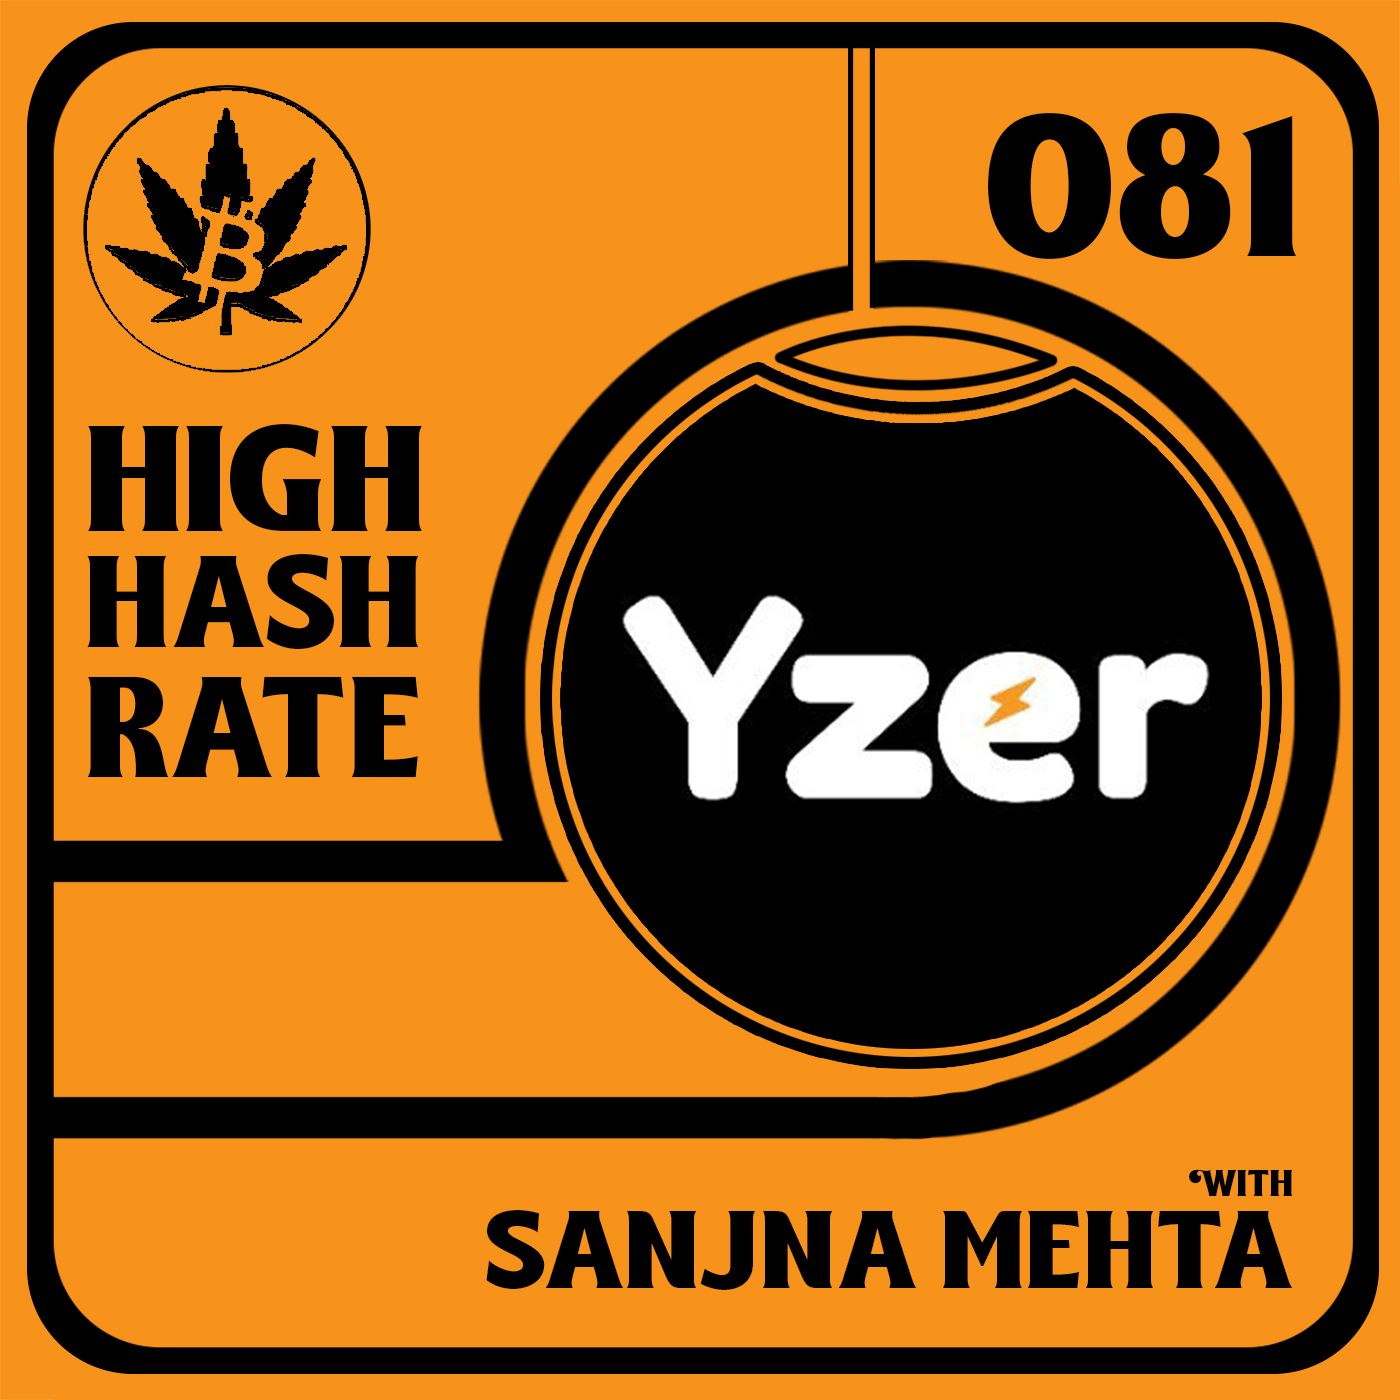 Educating The World About Bitcoin with Sanjna Mehta from Yzer - HHR081